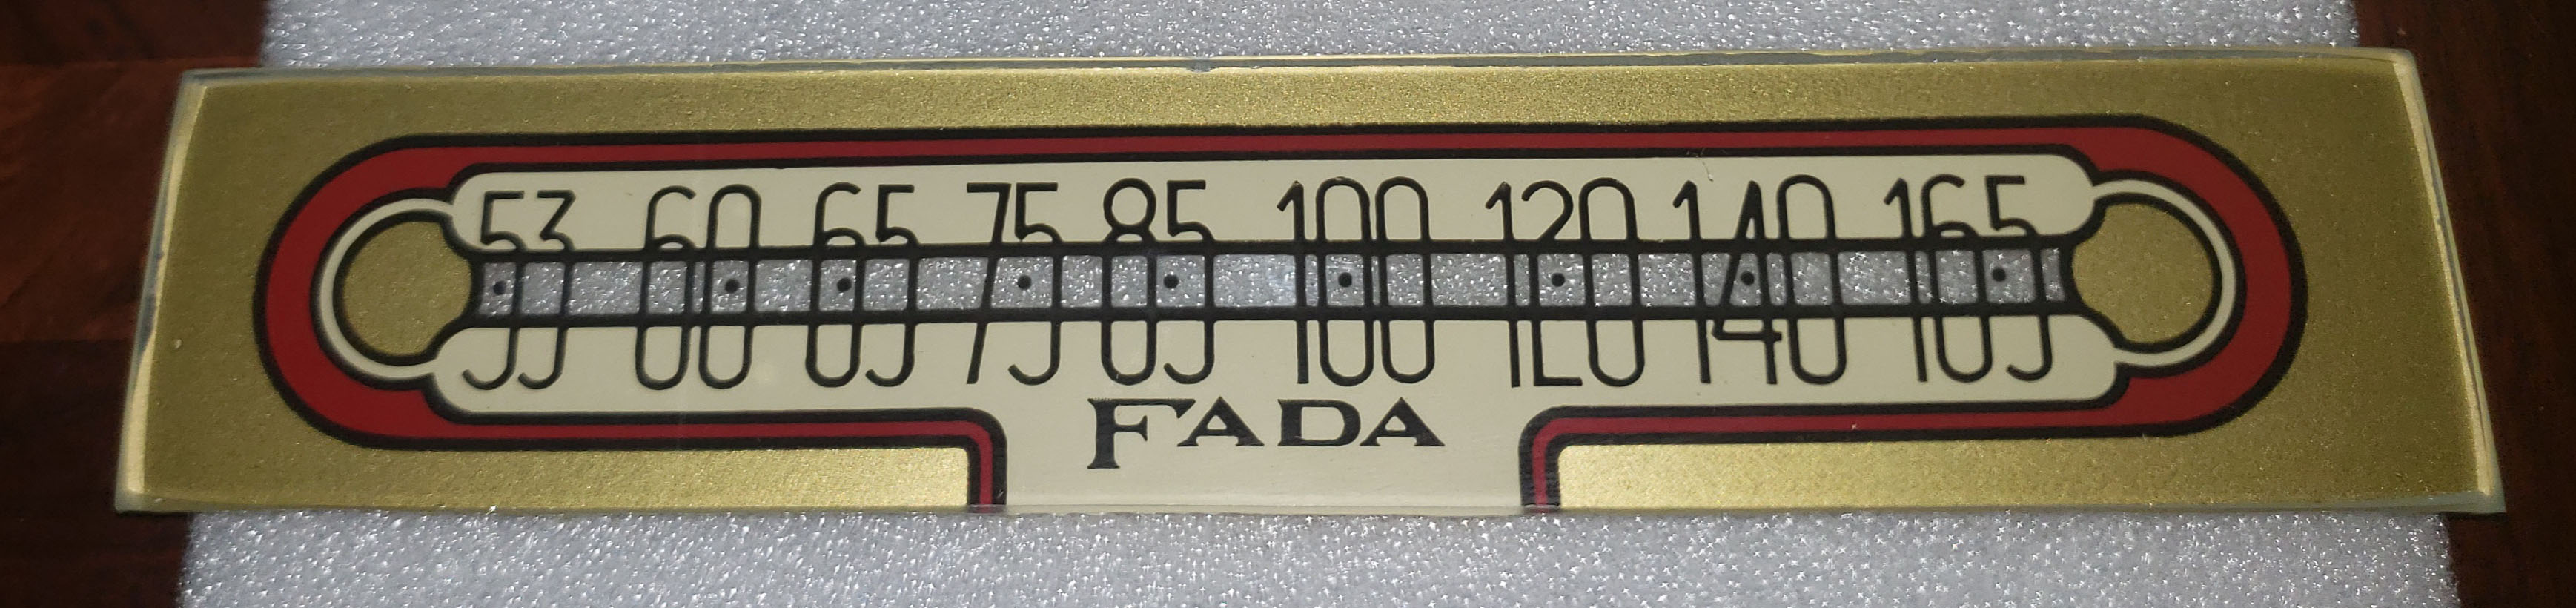 Fada Radio model 652 Temple dial glass replacement